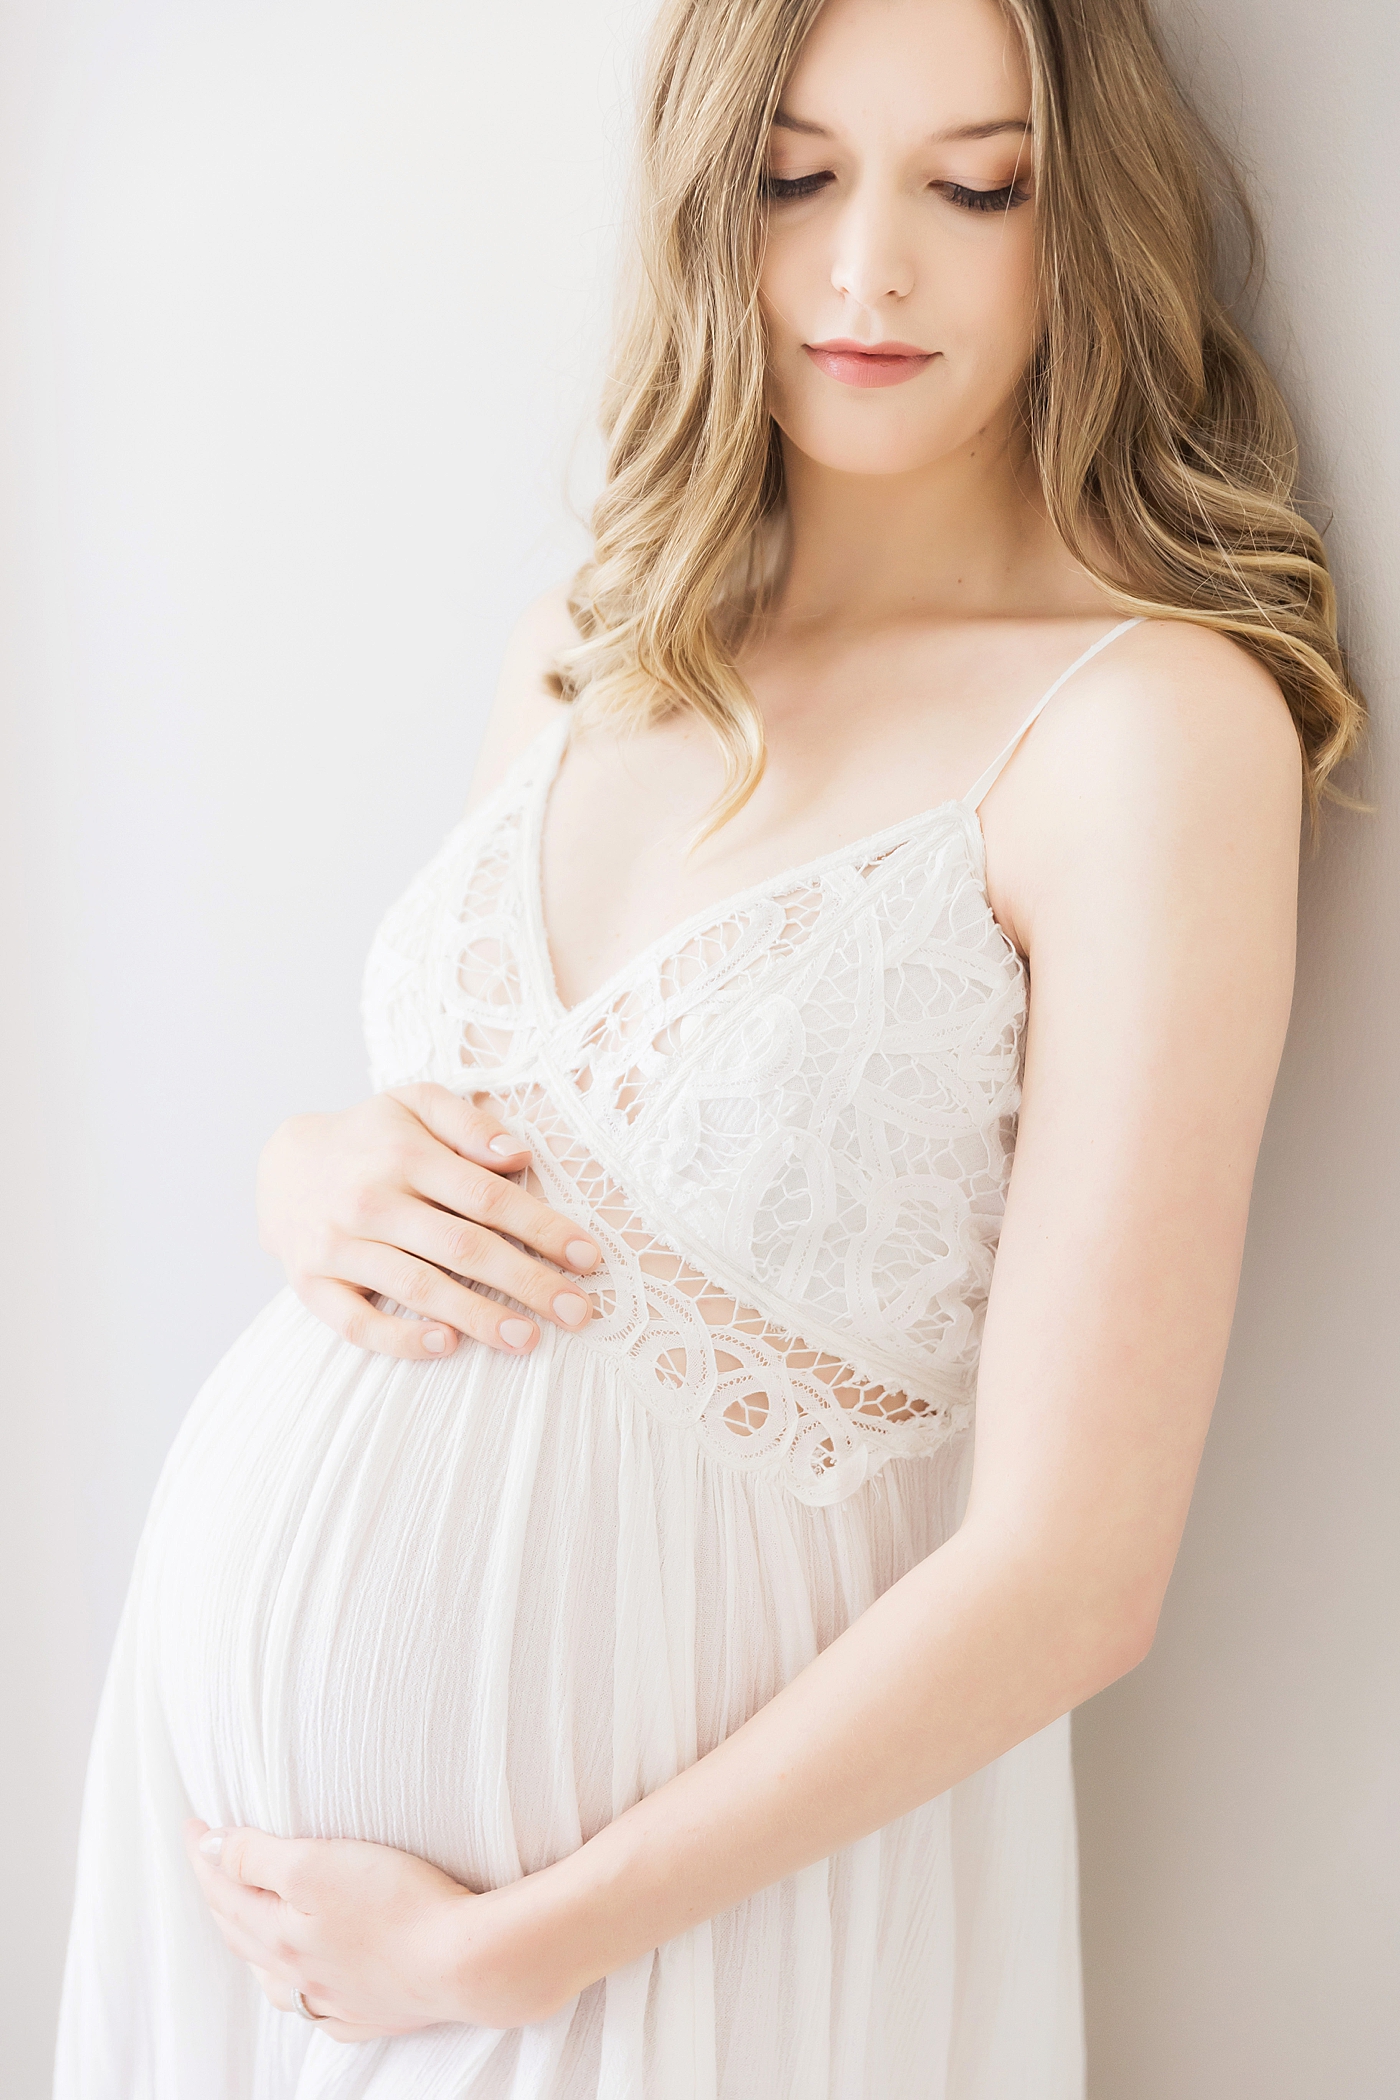 Mom in white lace dress for pregnancy photos. Photo by Fresh Light Photography.